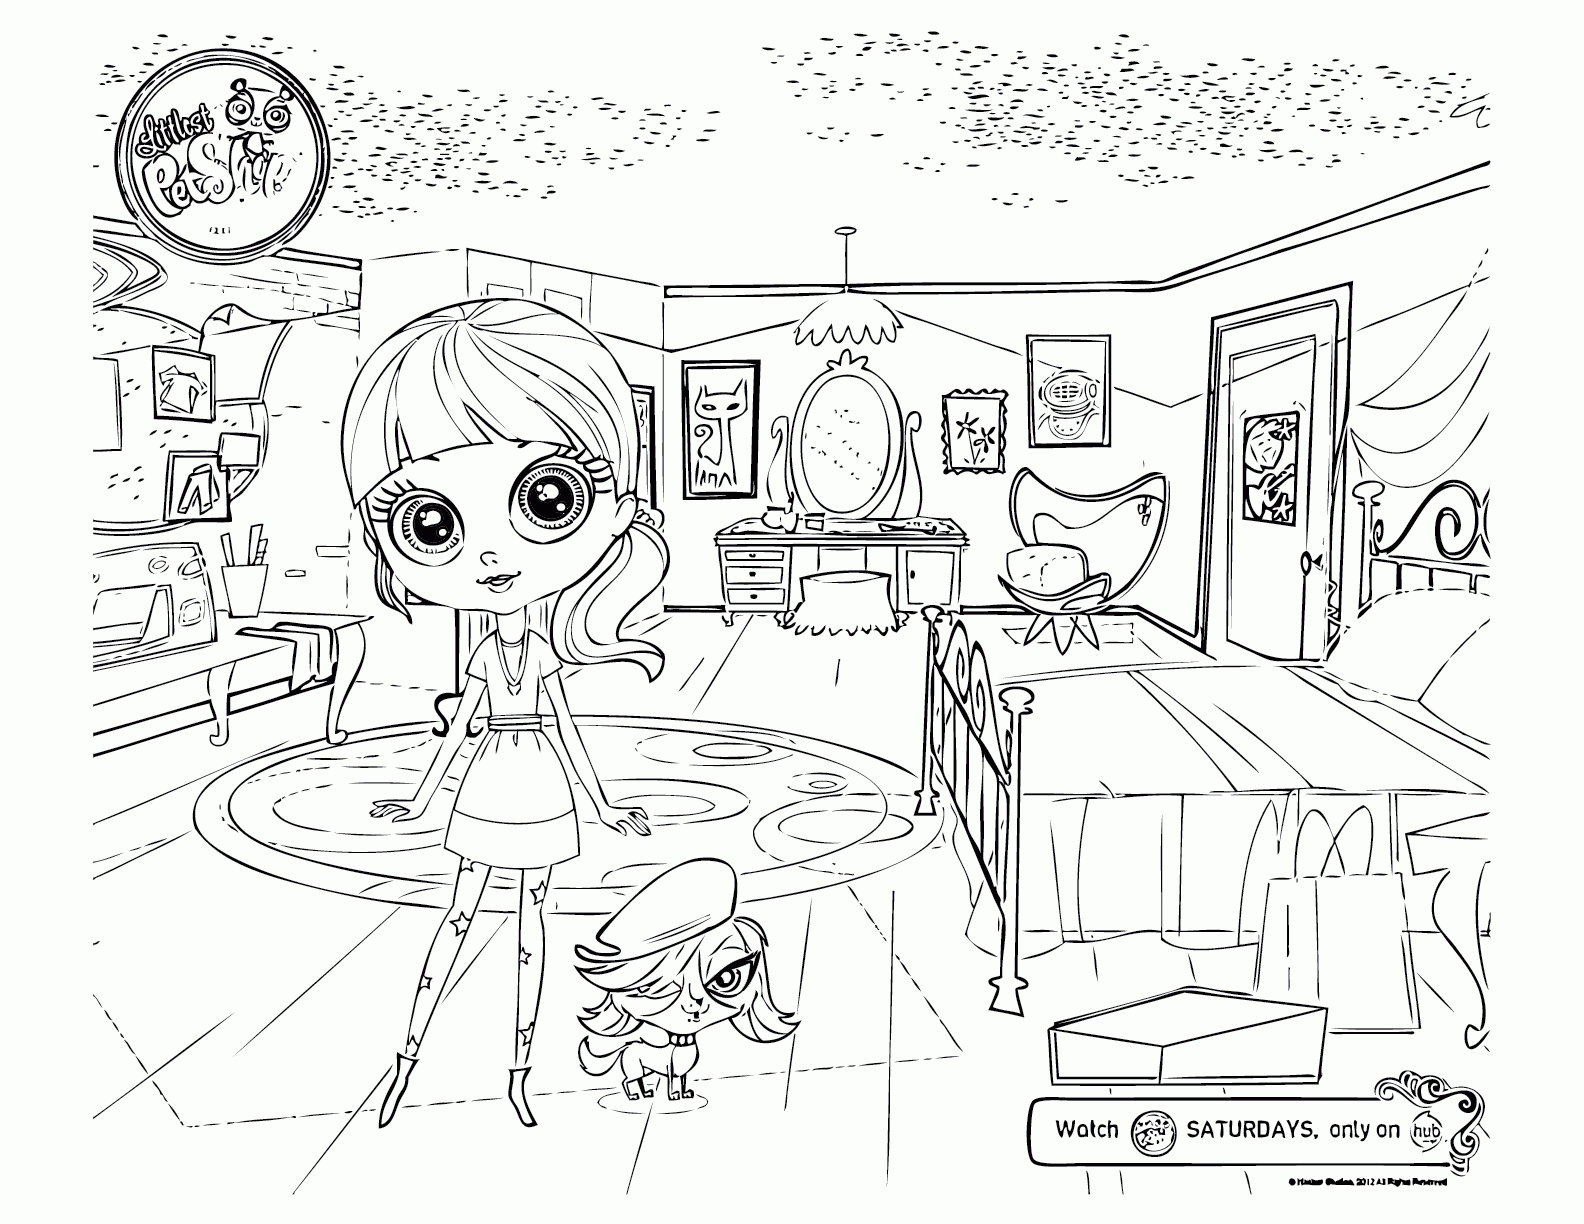 Pet shop coloring pages to download and print for free